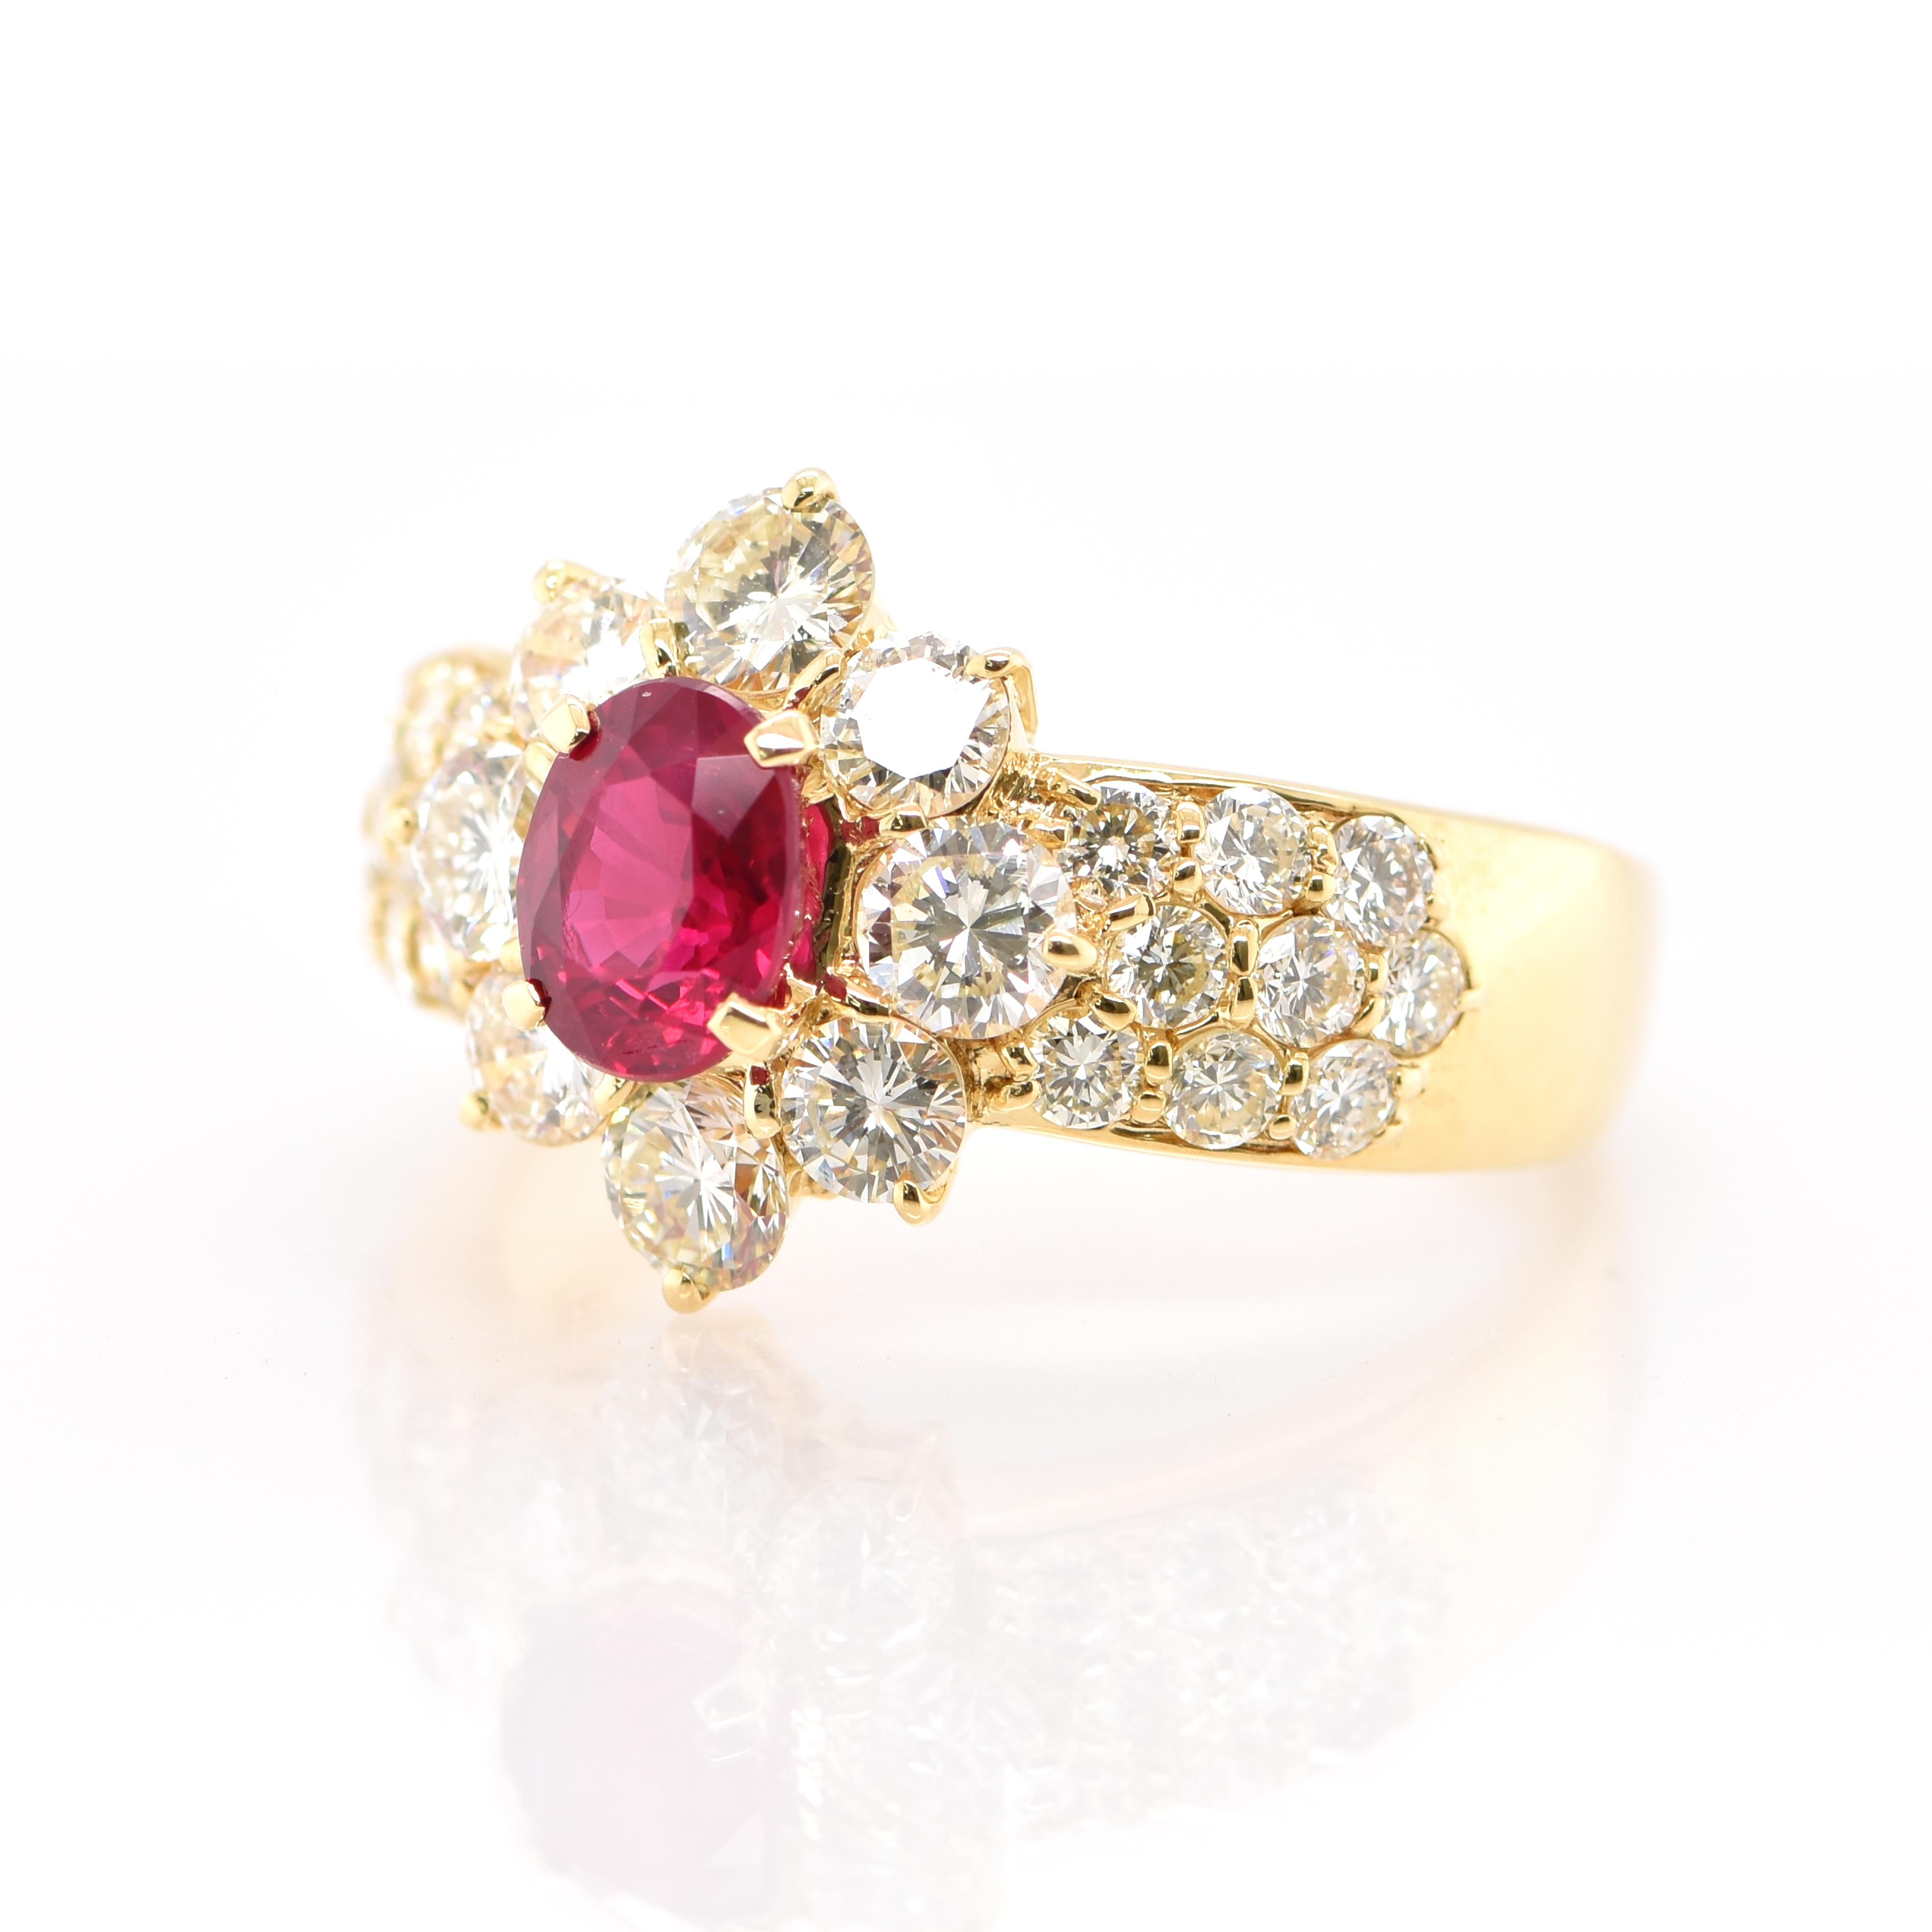 A beautiful Halo Ring featuring a GIA Certified 1.00 Carat Natural Burmese (Heated) Ruby and 1.80 Carats of Diamond Accents set in 18K Gold. Rubies are referred to as 